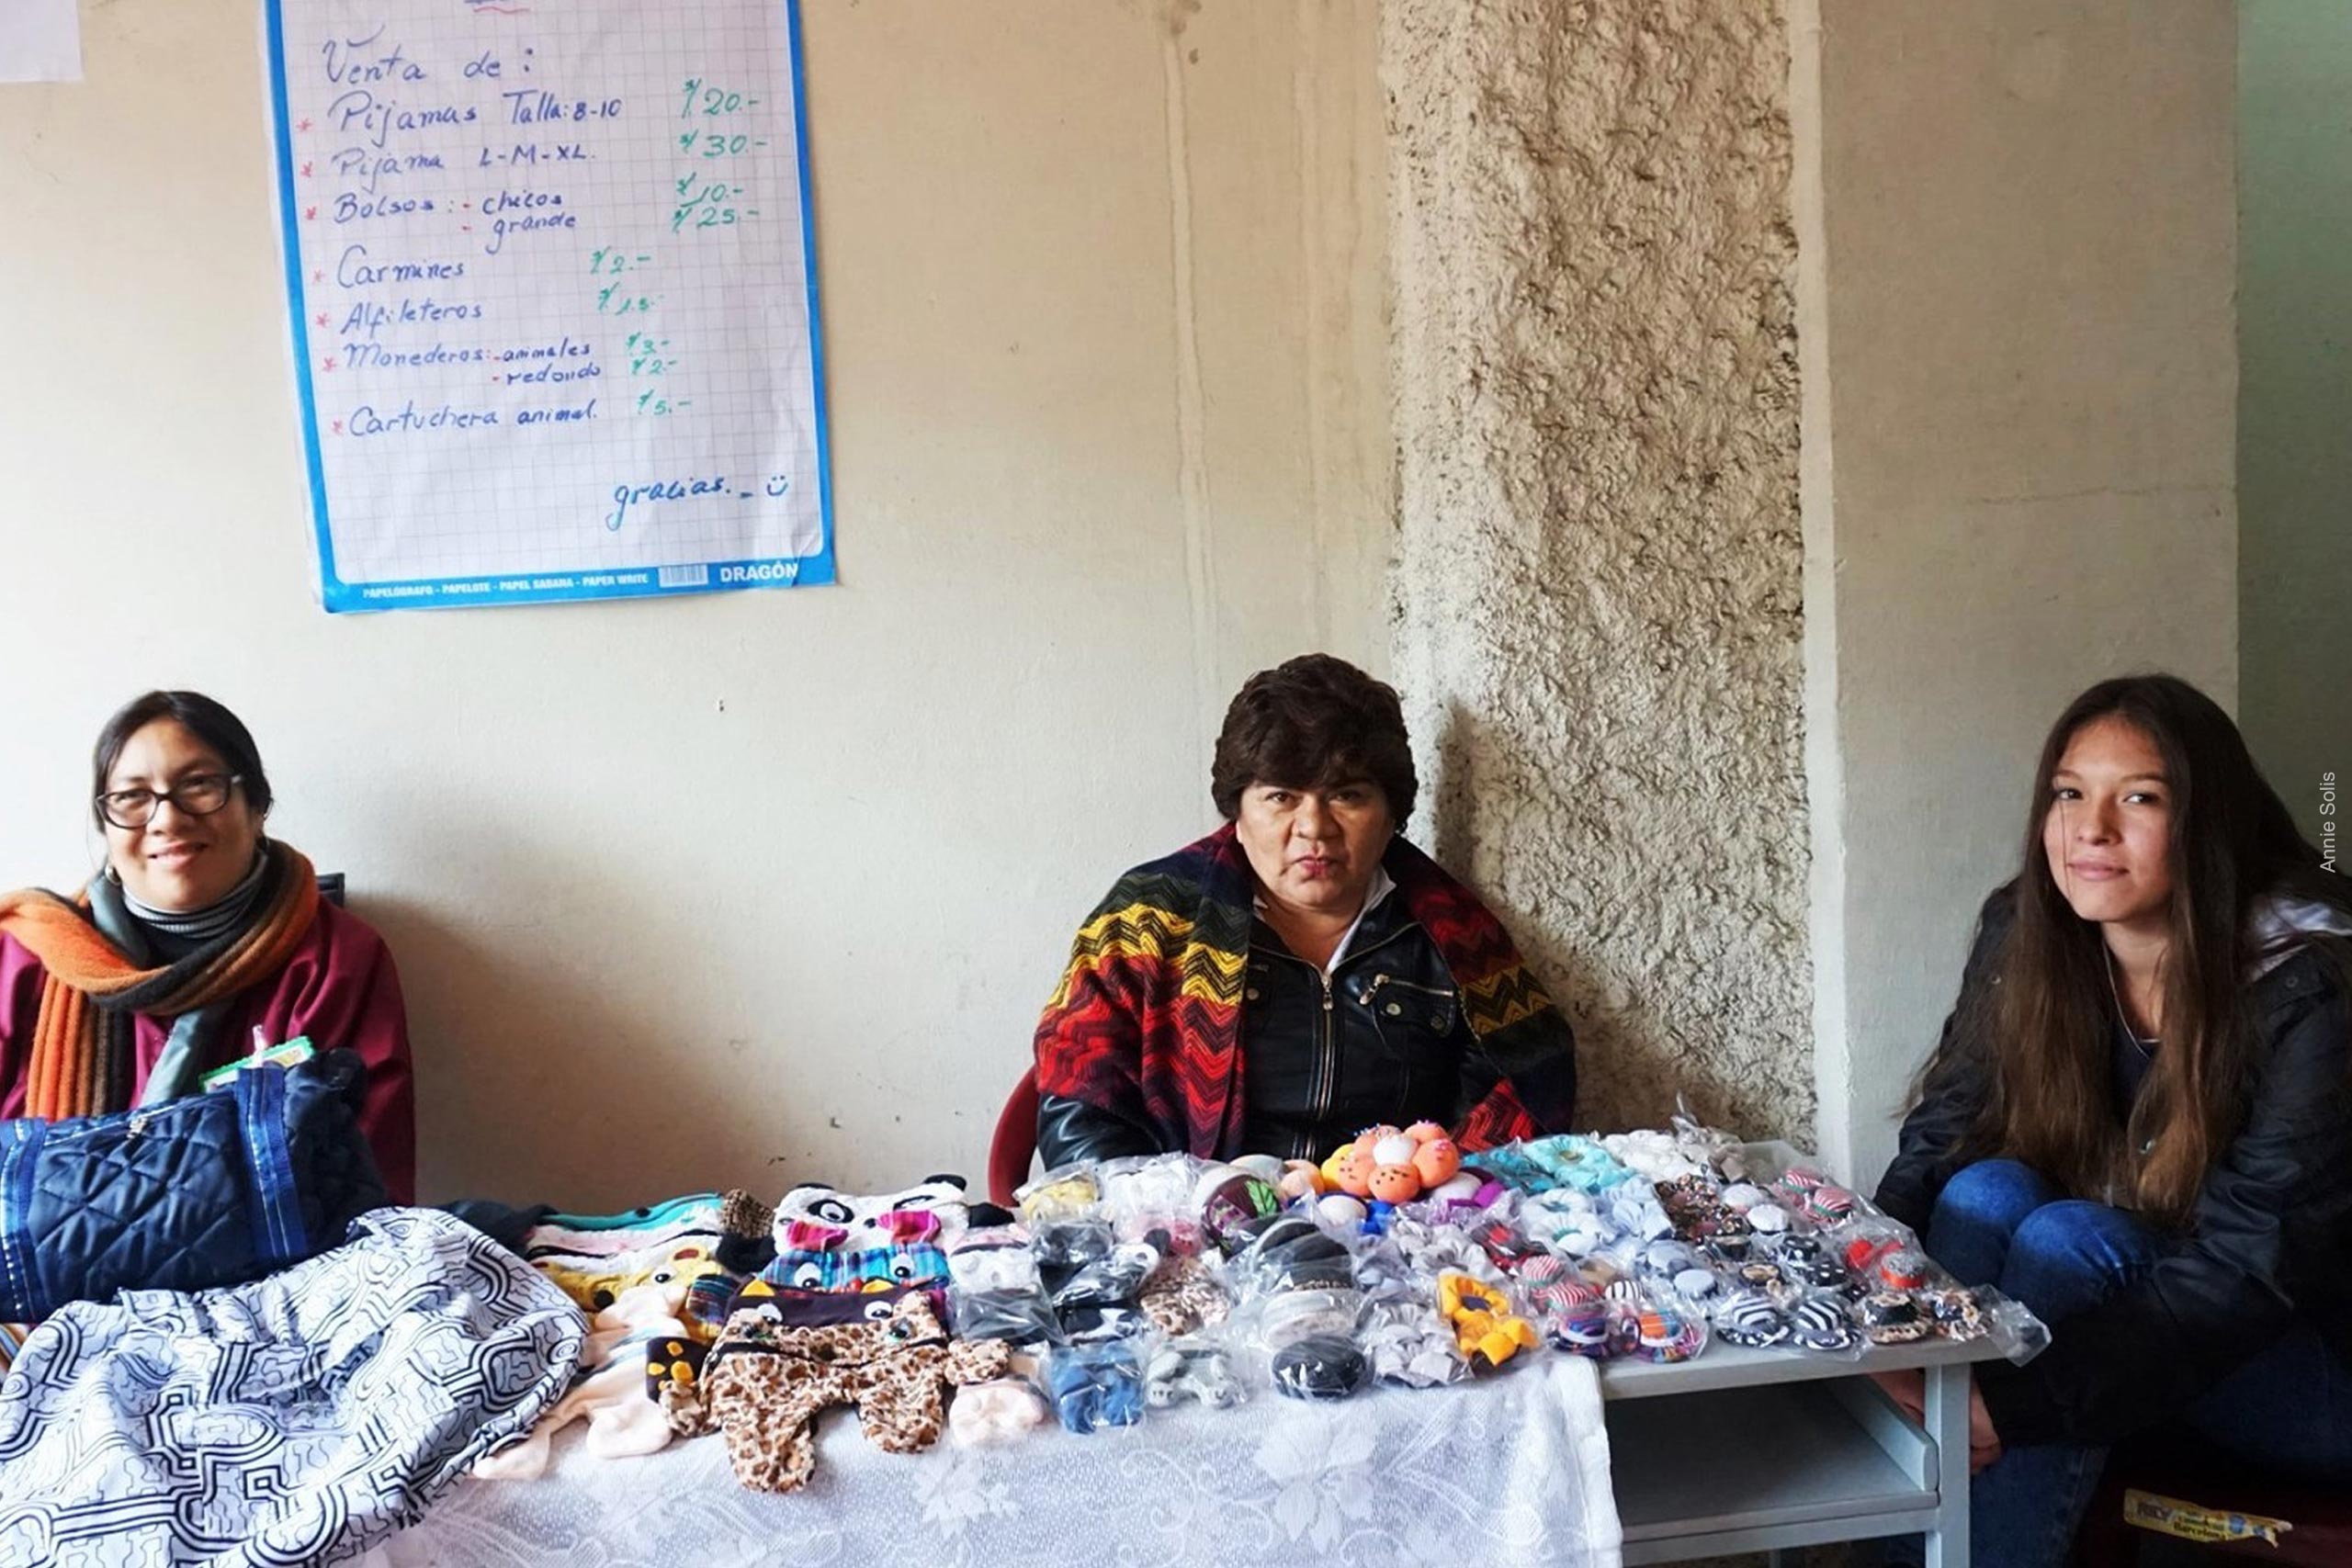 3 women displaying their items on a table